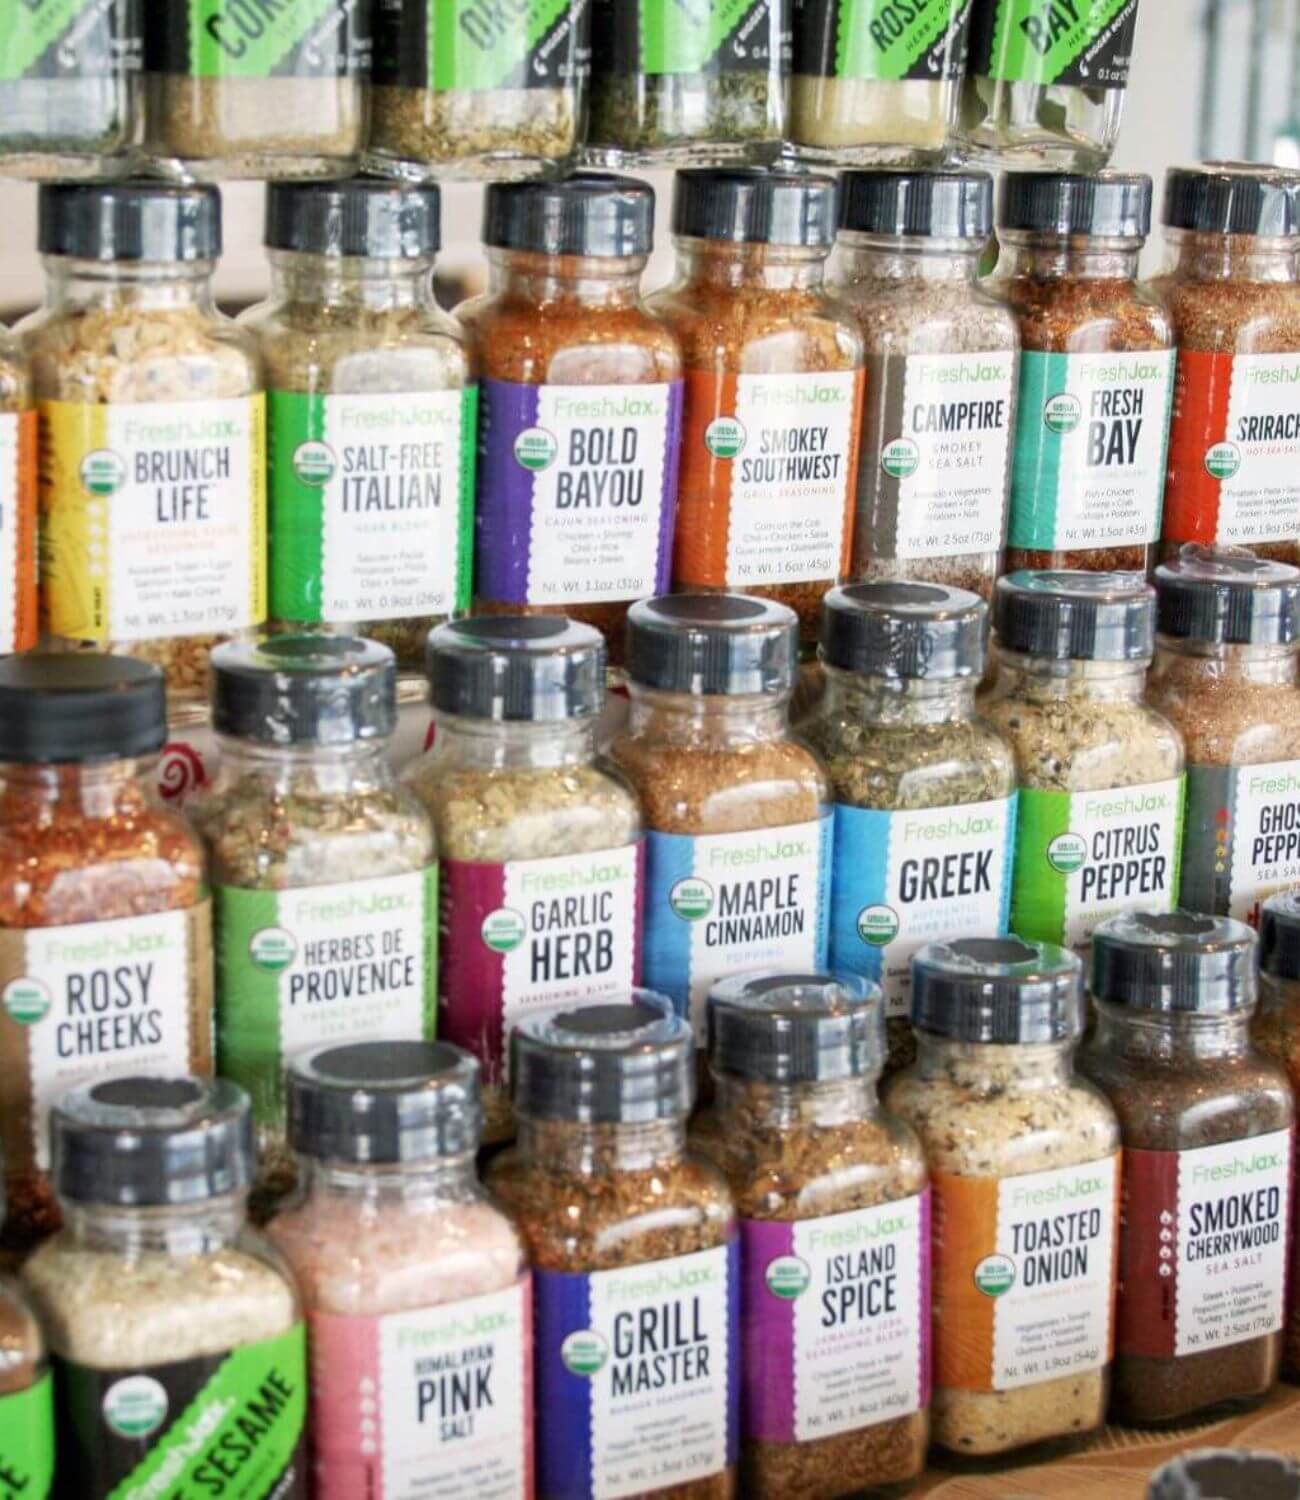 FreshJax Spices on display at a retail store